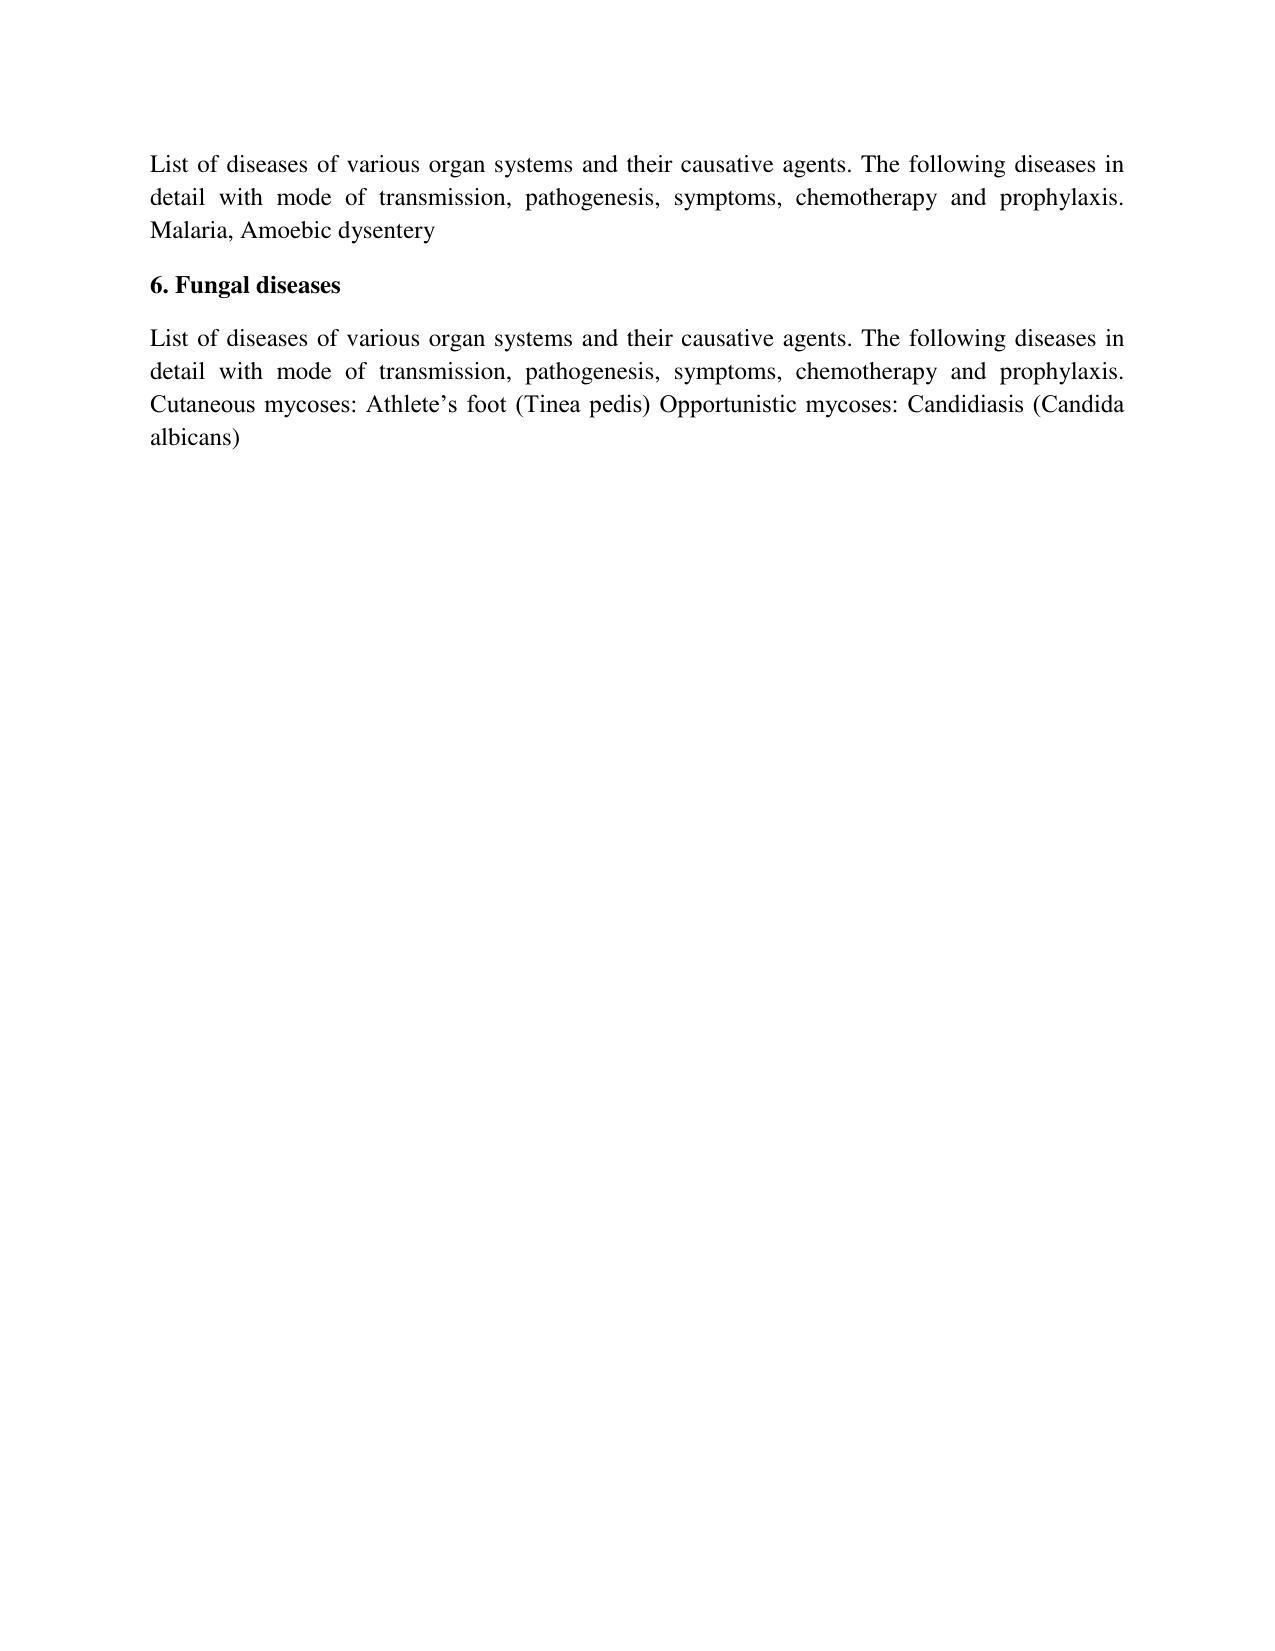 GU ART Post Graduate Diploma in Clinical Genetics and Medical Laboratory Techniques (PGDCG & MLT) Syllabus - Page 7